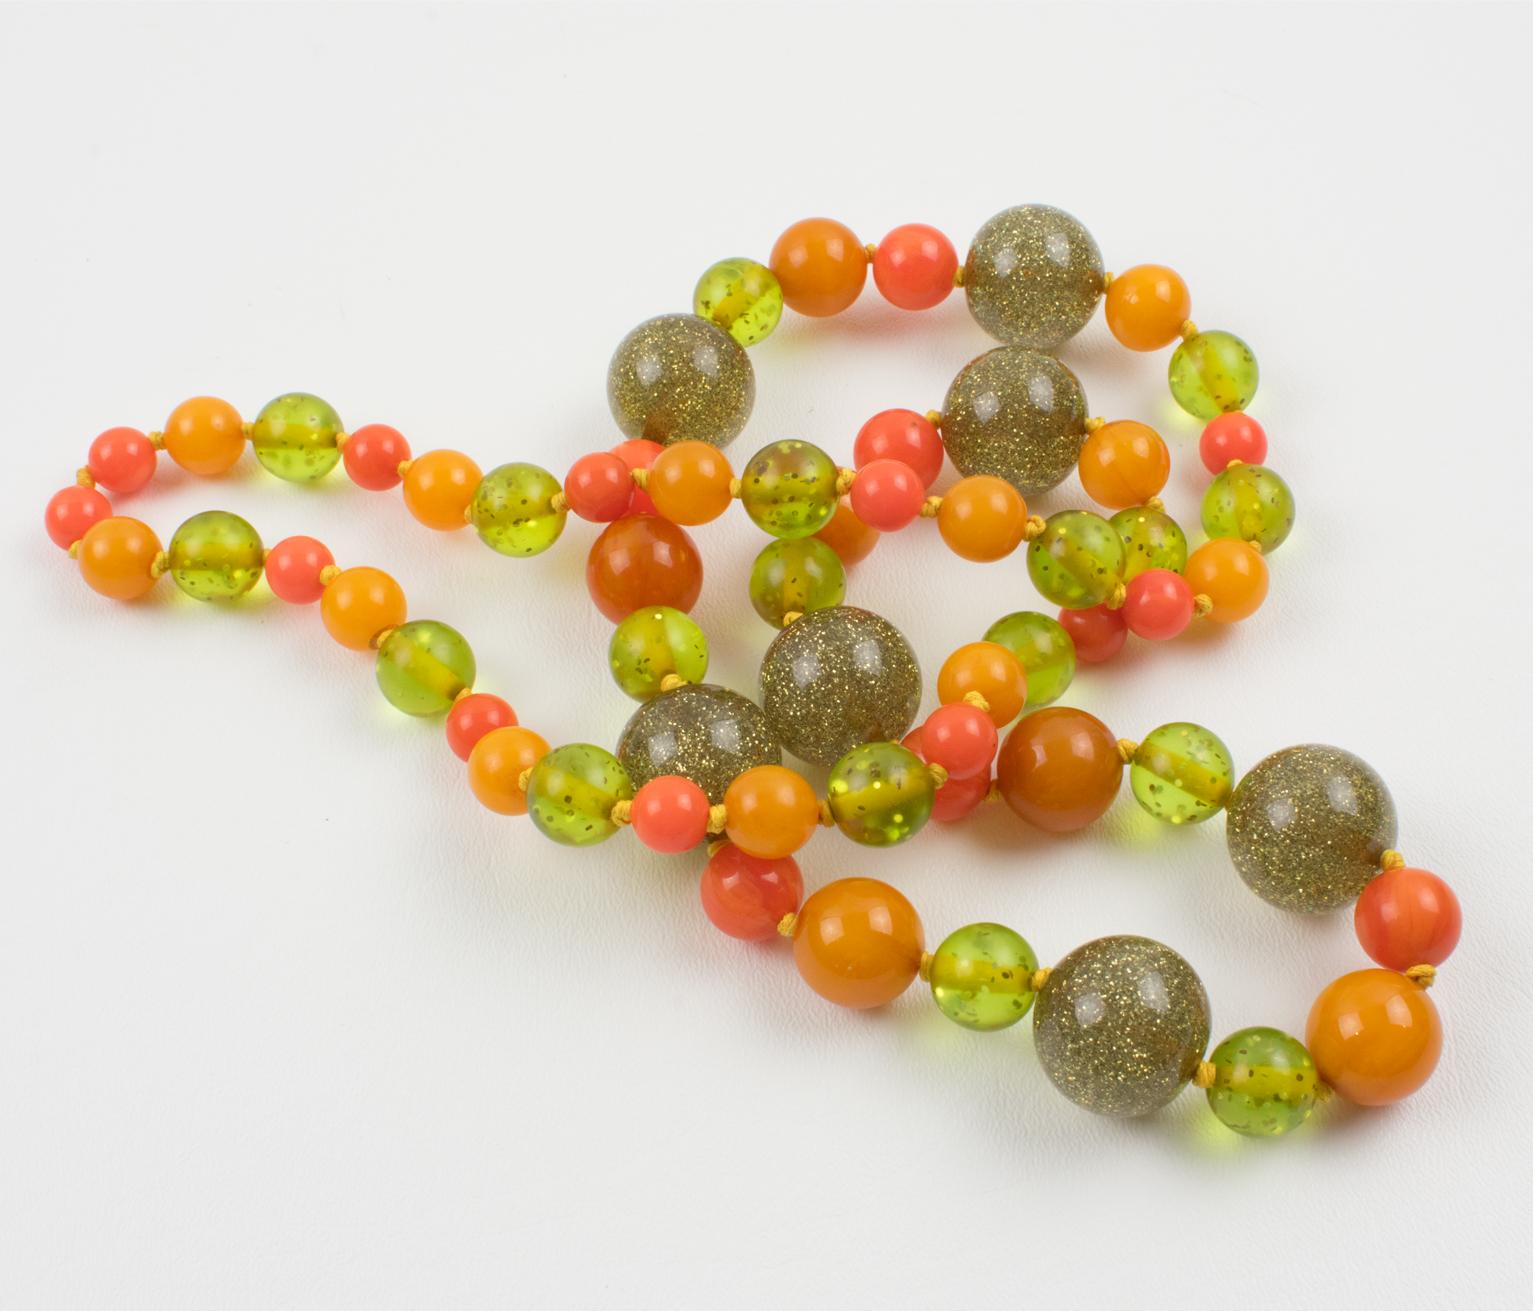 Bakelite and Lucite Extra Long Necklace with Orange, Green and Glitter Beads For Sale 4